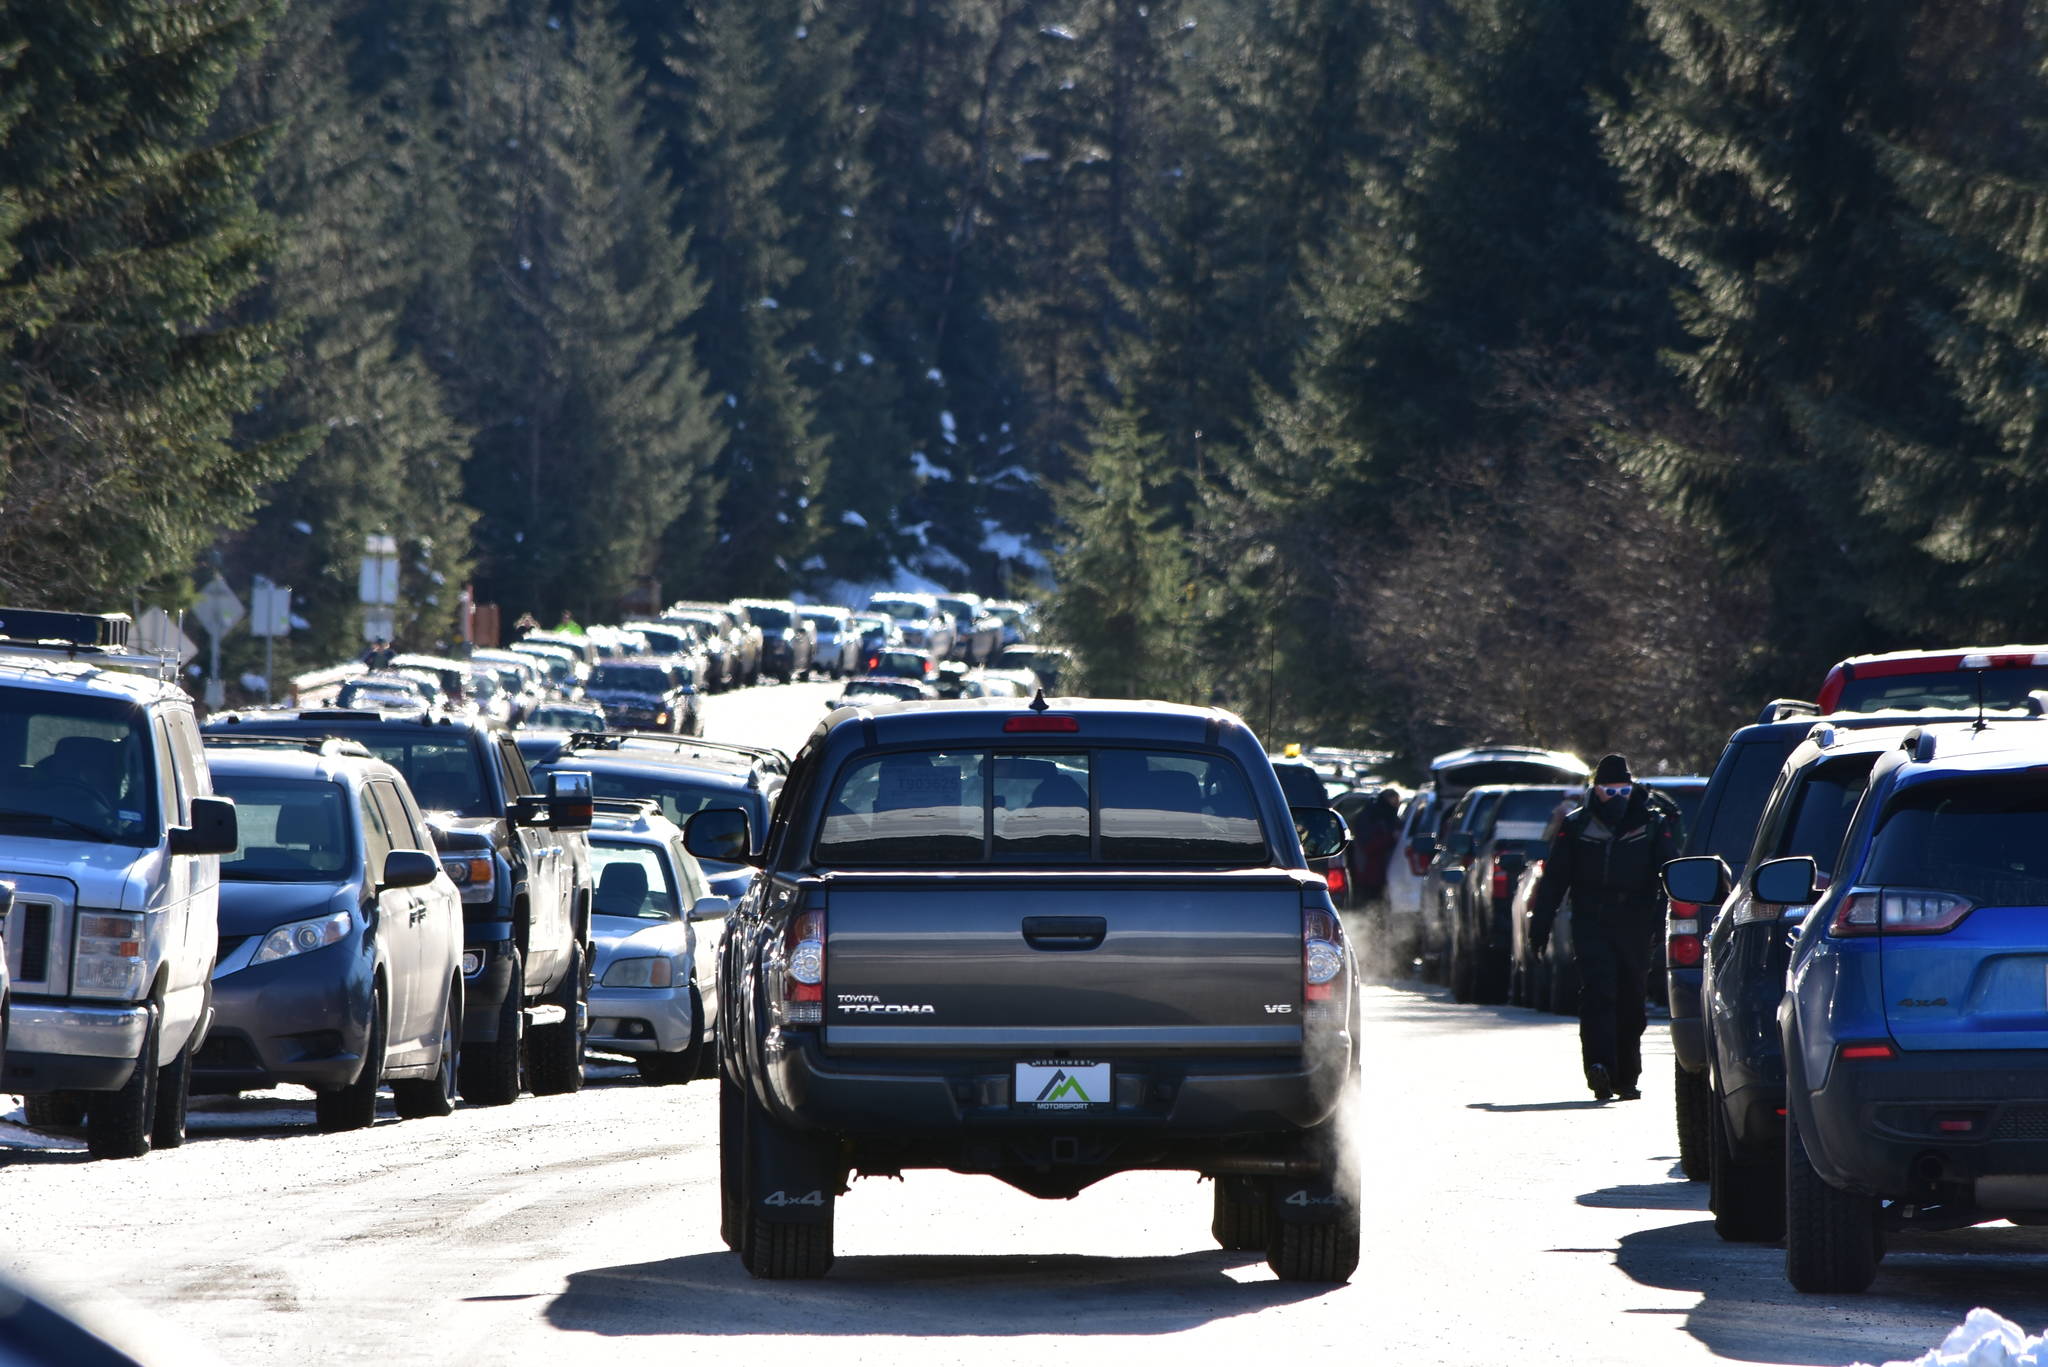 The parking lots at the Mendenhall Glacier Visitor Center were packed on Feb. 13, 2021, and plans to improve the facilities include expanding the parking lot. Those plans were criticized by residents for the impacts to the environment and a draft environmental impact statement is expected later this summer. (Peter Segall / Juneau Empire)